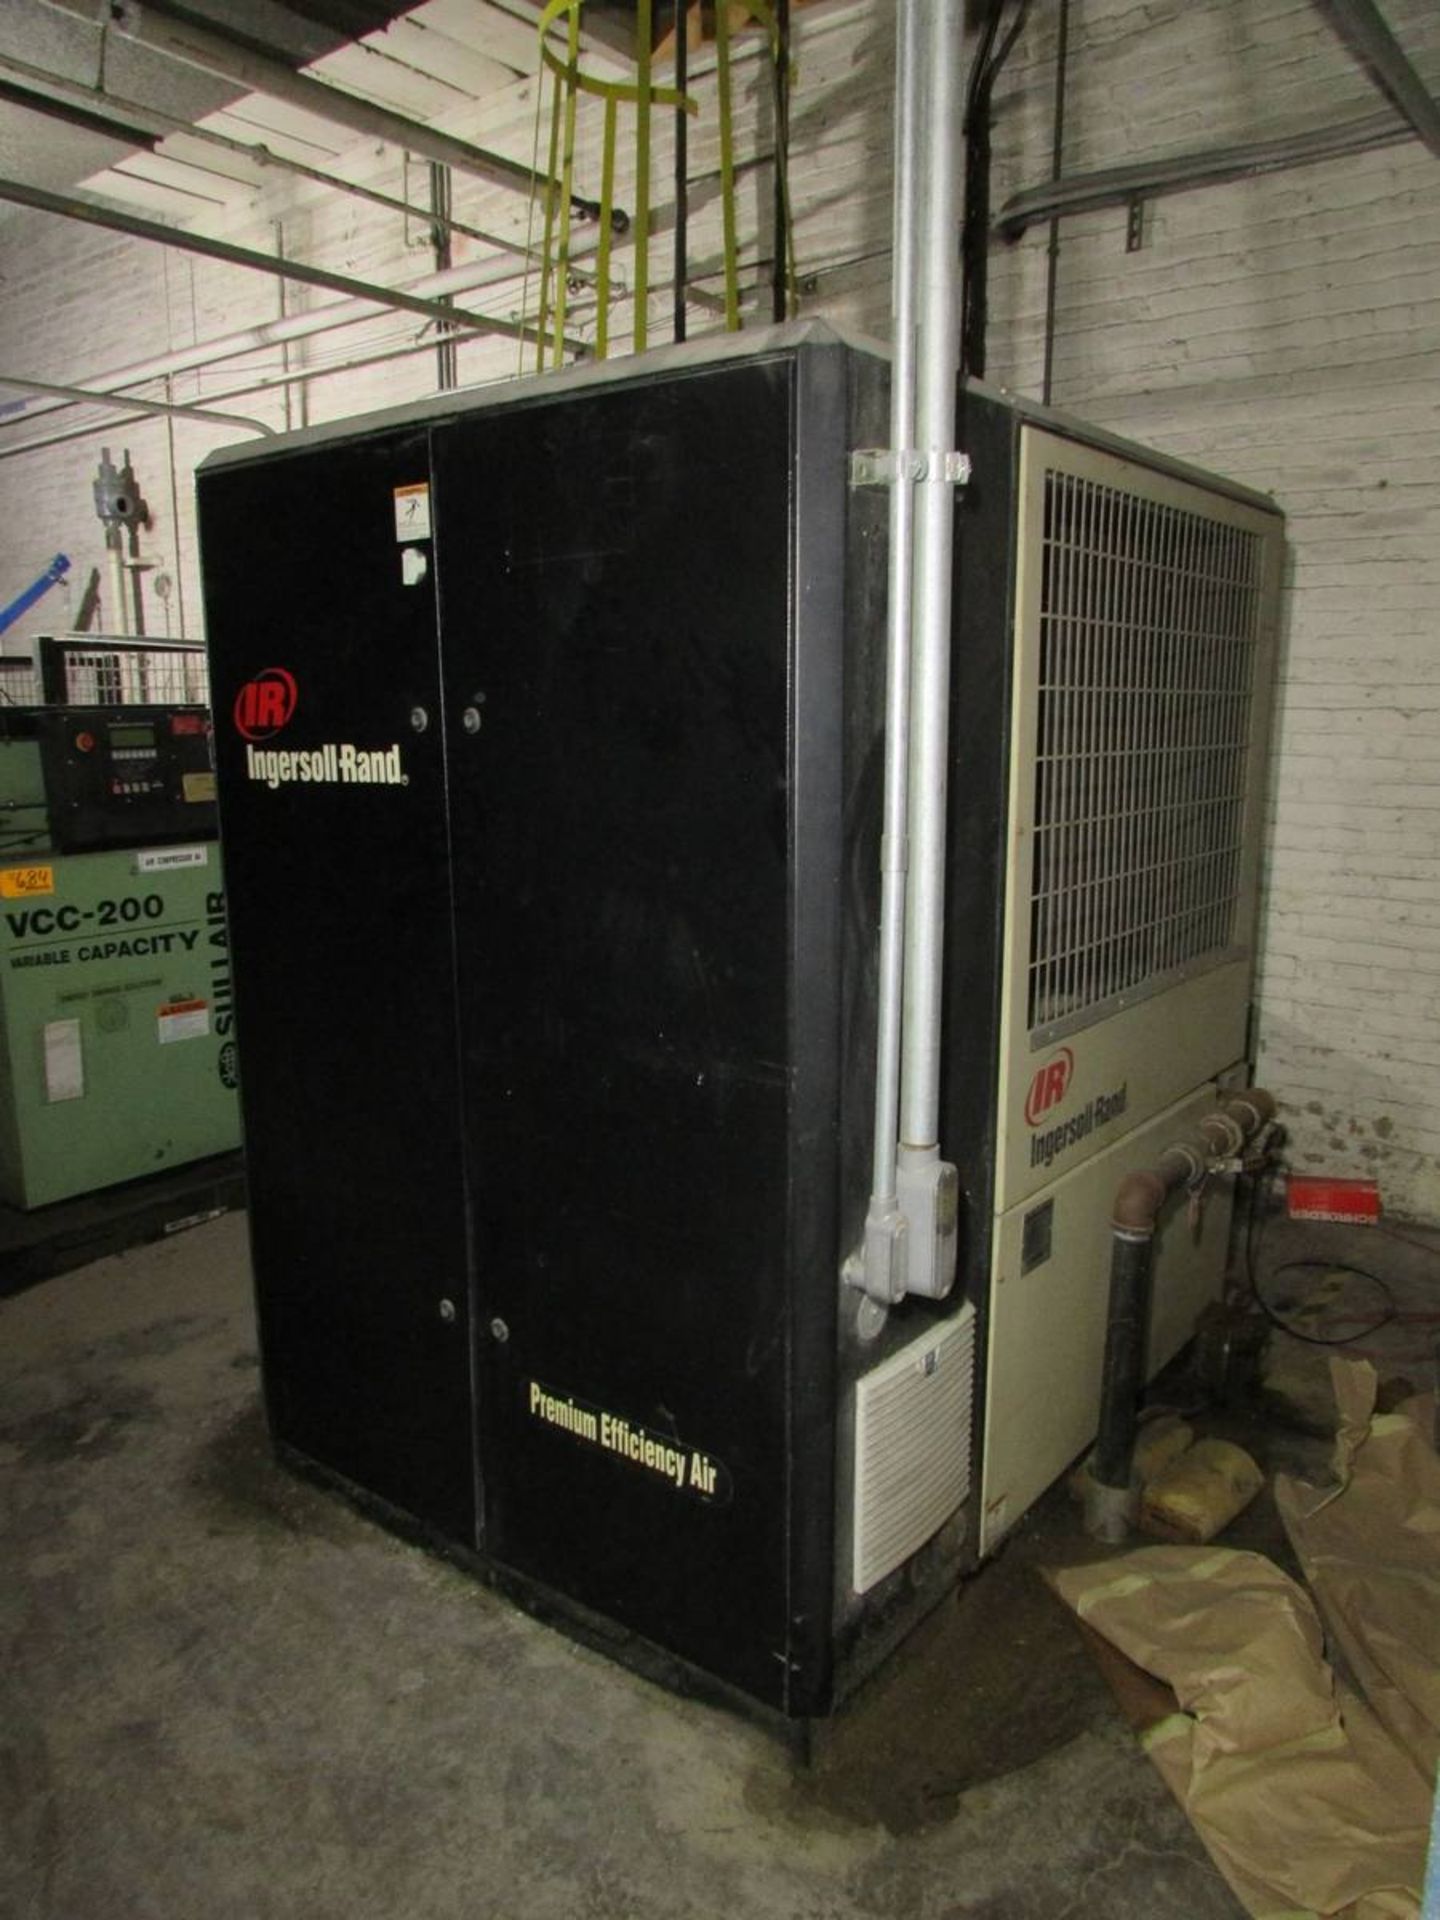 Ingersoll-Rand IRN100H-CC 100 HP Rotary Screw Air Compressor - Image 4 of 8